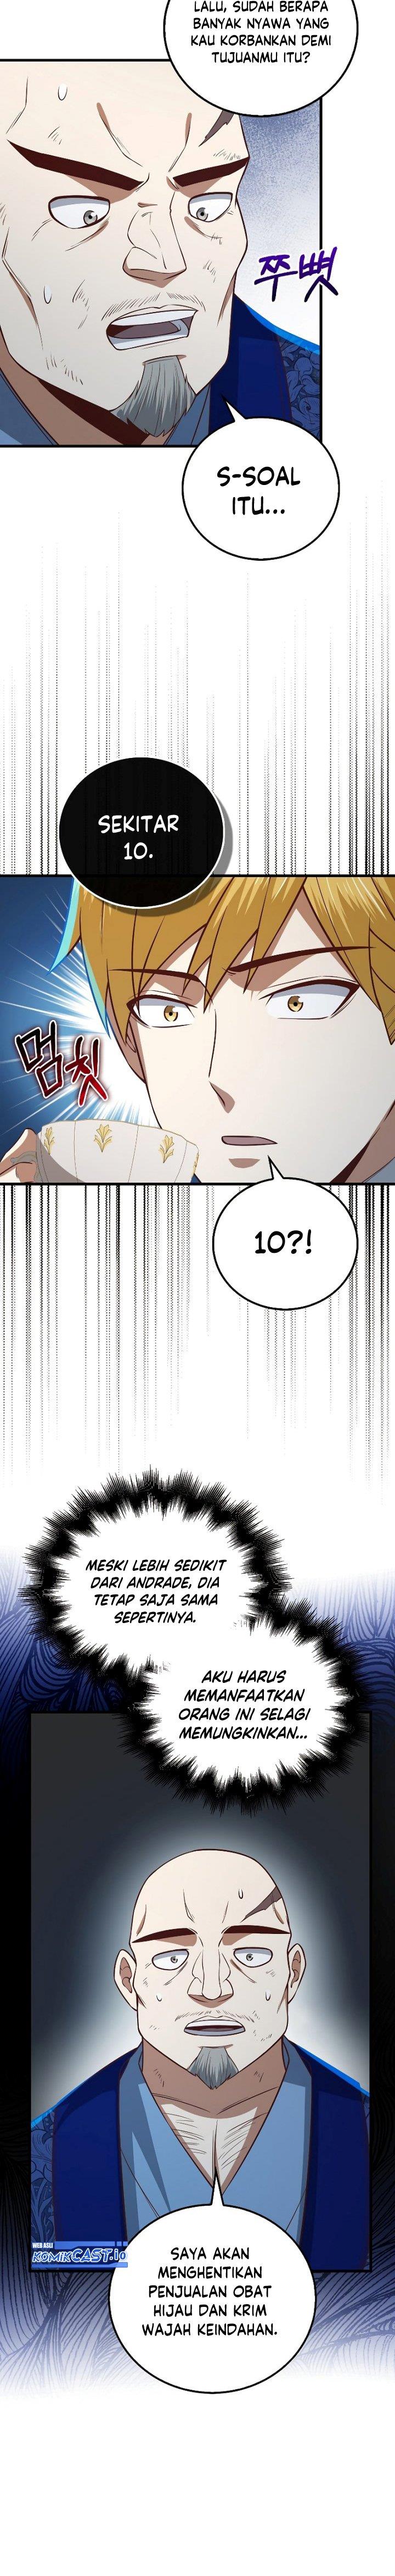 The Lord’s Coins Aren’t Decreasing?! Chapter 100